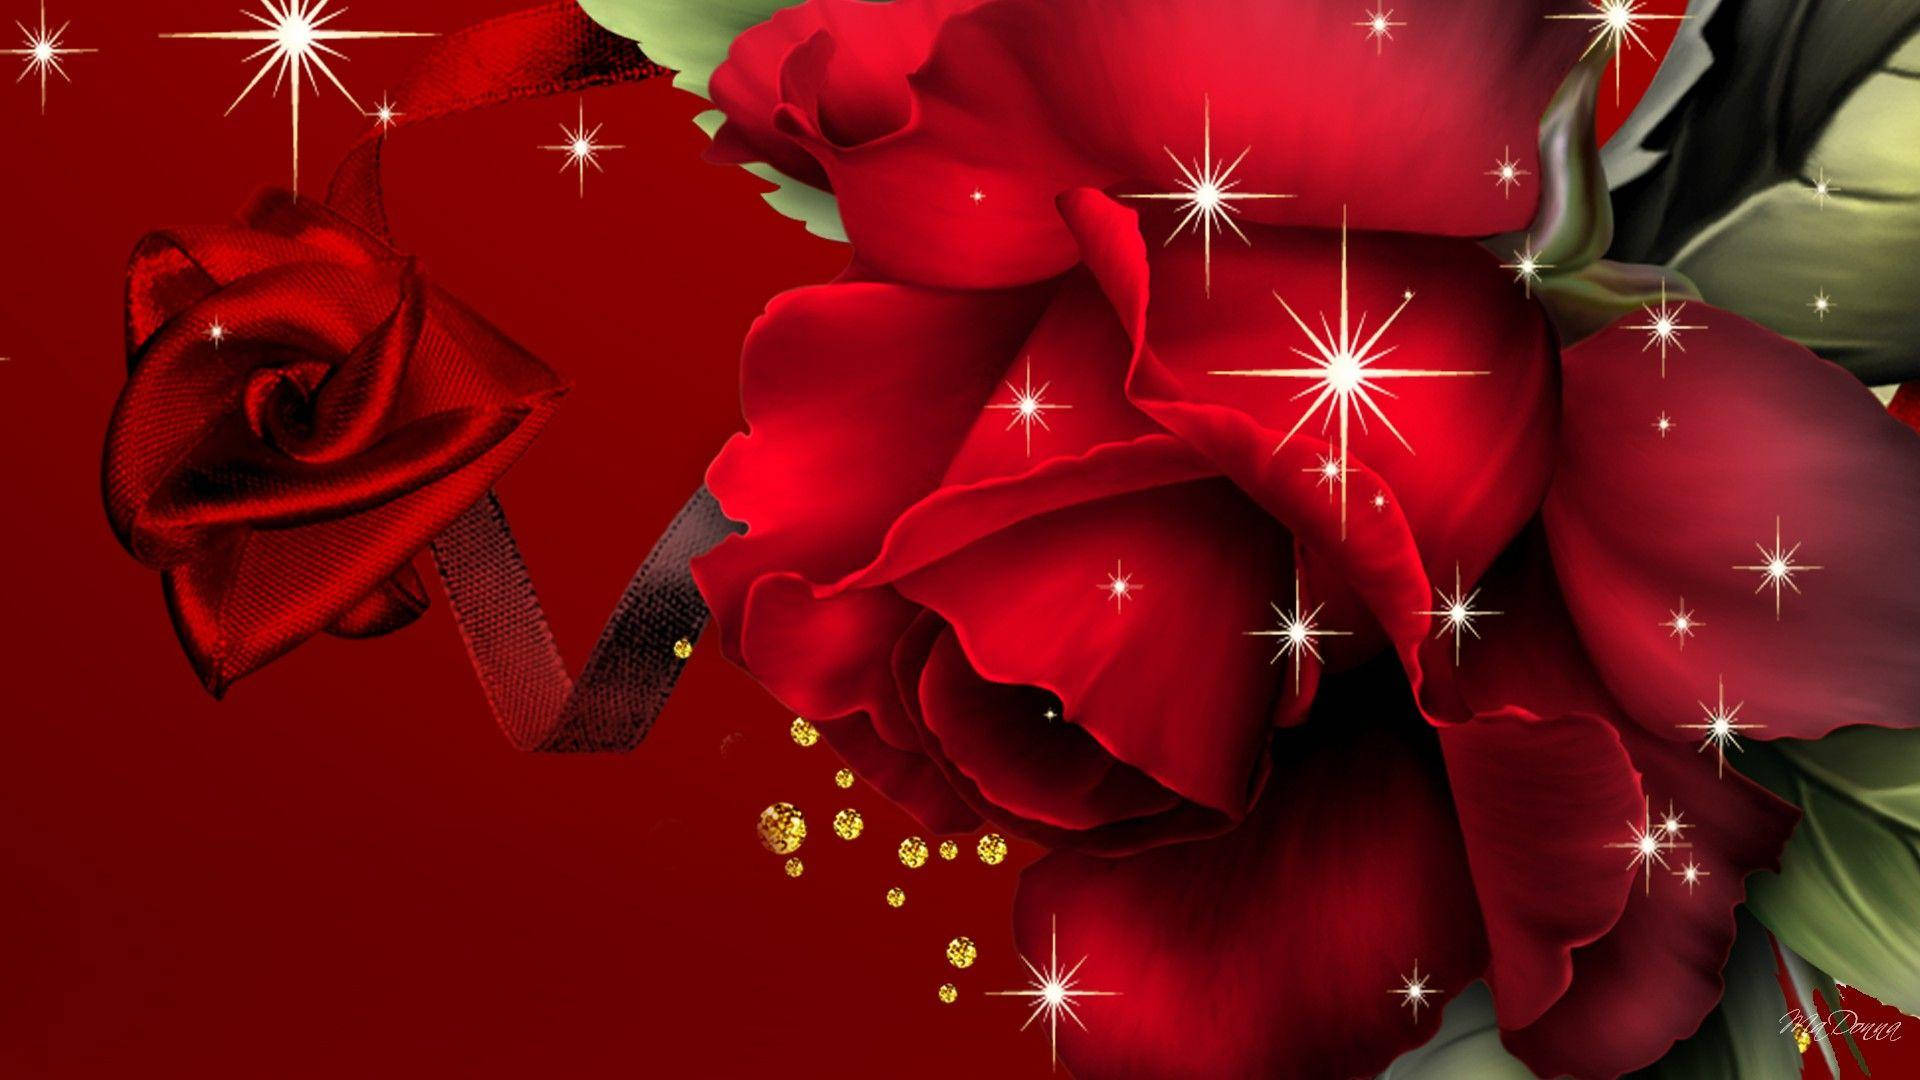 Beautiful Rose Hd Image With Sparkles Background